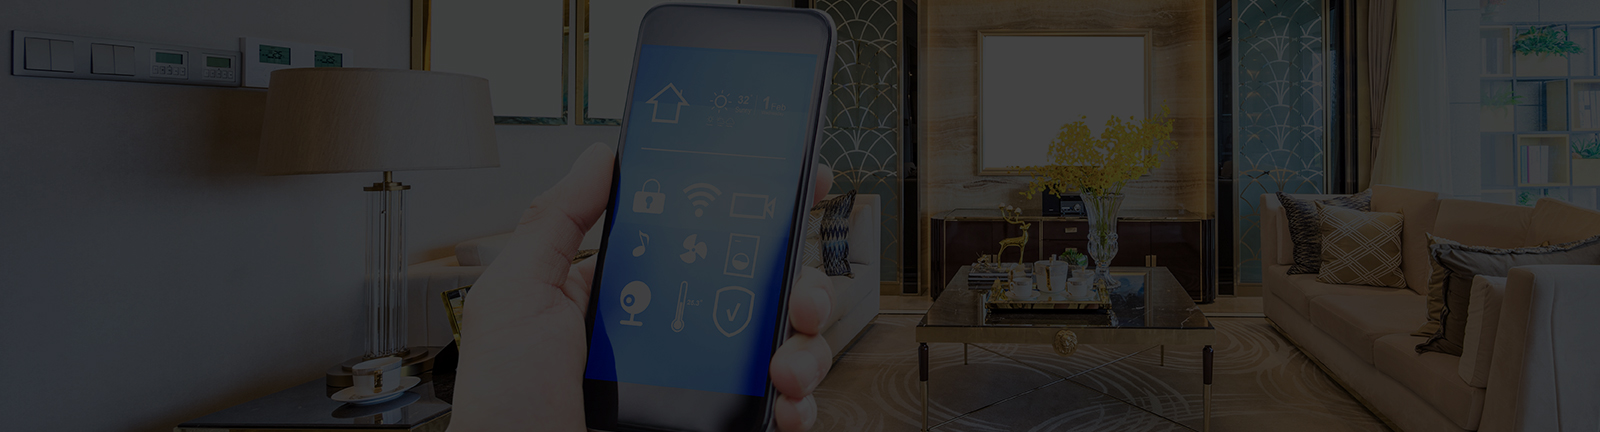 Smart home technology: A rising opportunity for energy utilities